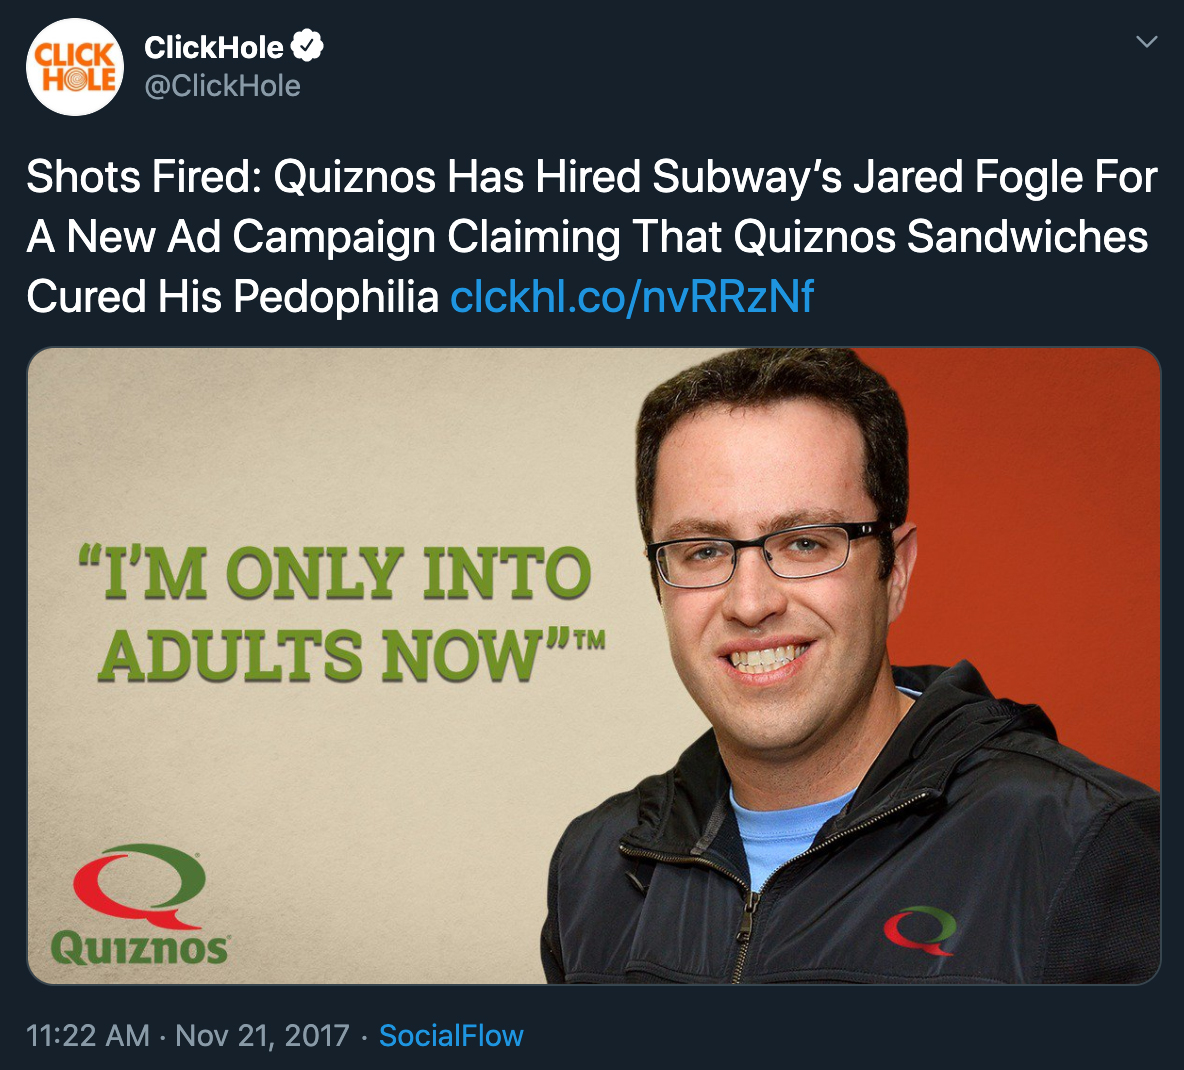 ...clickhole.com/shots-fired-quiznos-has-hired-subway-s-jared-fogle-for-182...